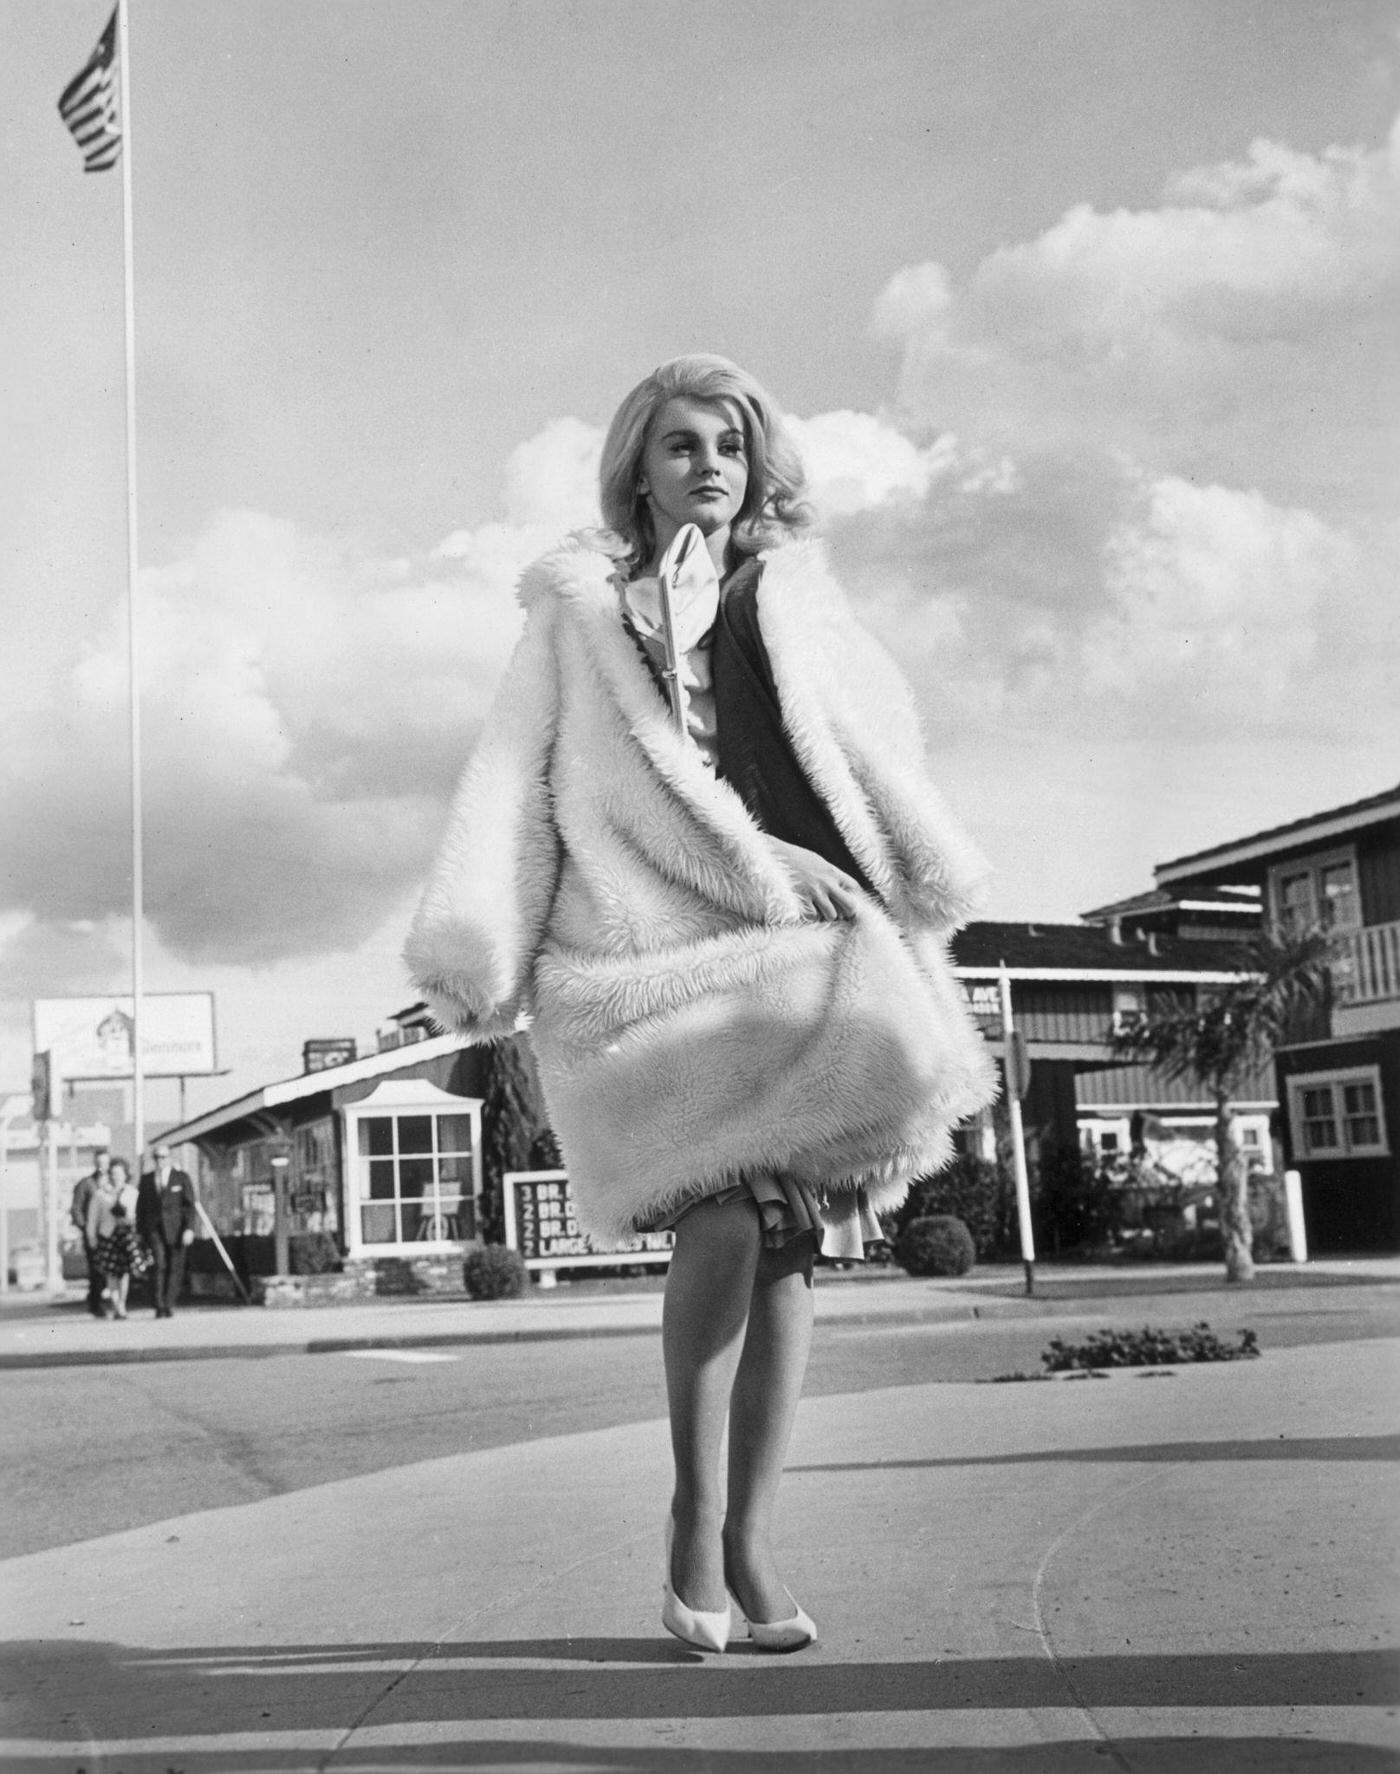 Ann-Margret wears a fake fur coat while walking on a sidewalk in a still from the film, 'Kitten With a Whip'.